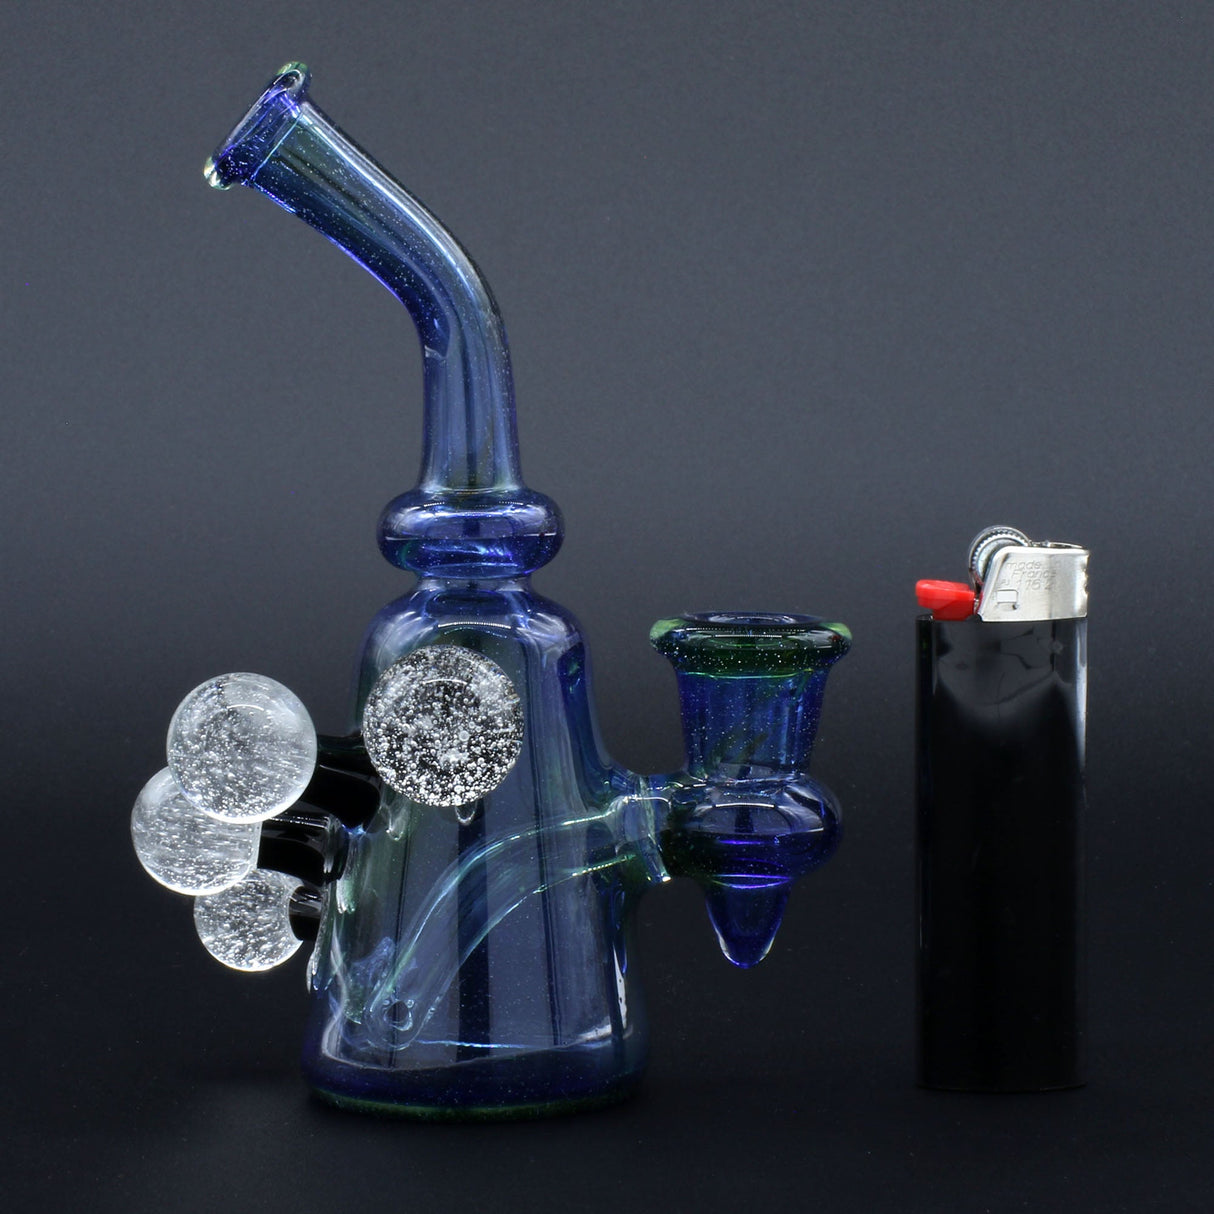 Clayball Glass "Super Nova" Heady Sherlock Dab Rig with intricate glasswork, side view next to a lighter